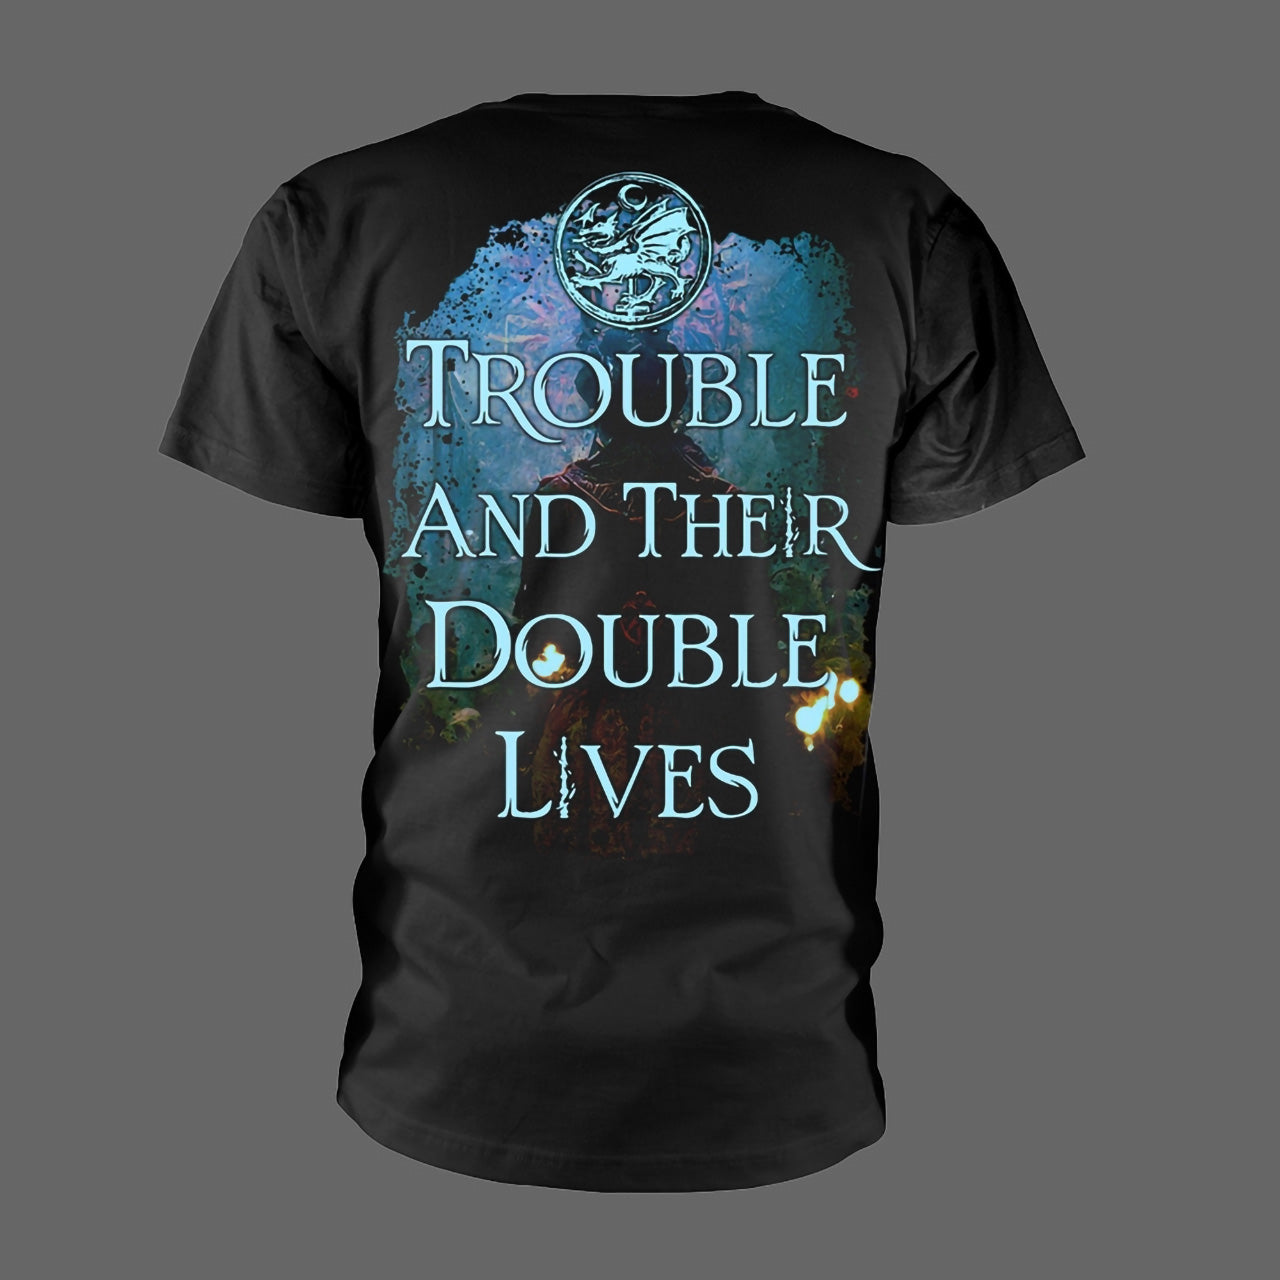 Cradle of Filth - Trouble and Their Double Lives (T-Shirt)